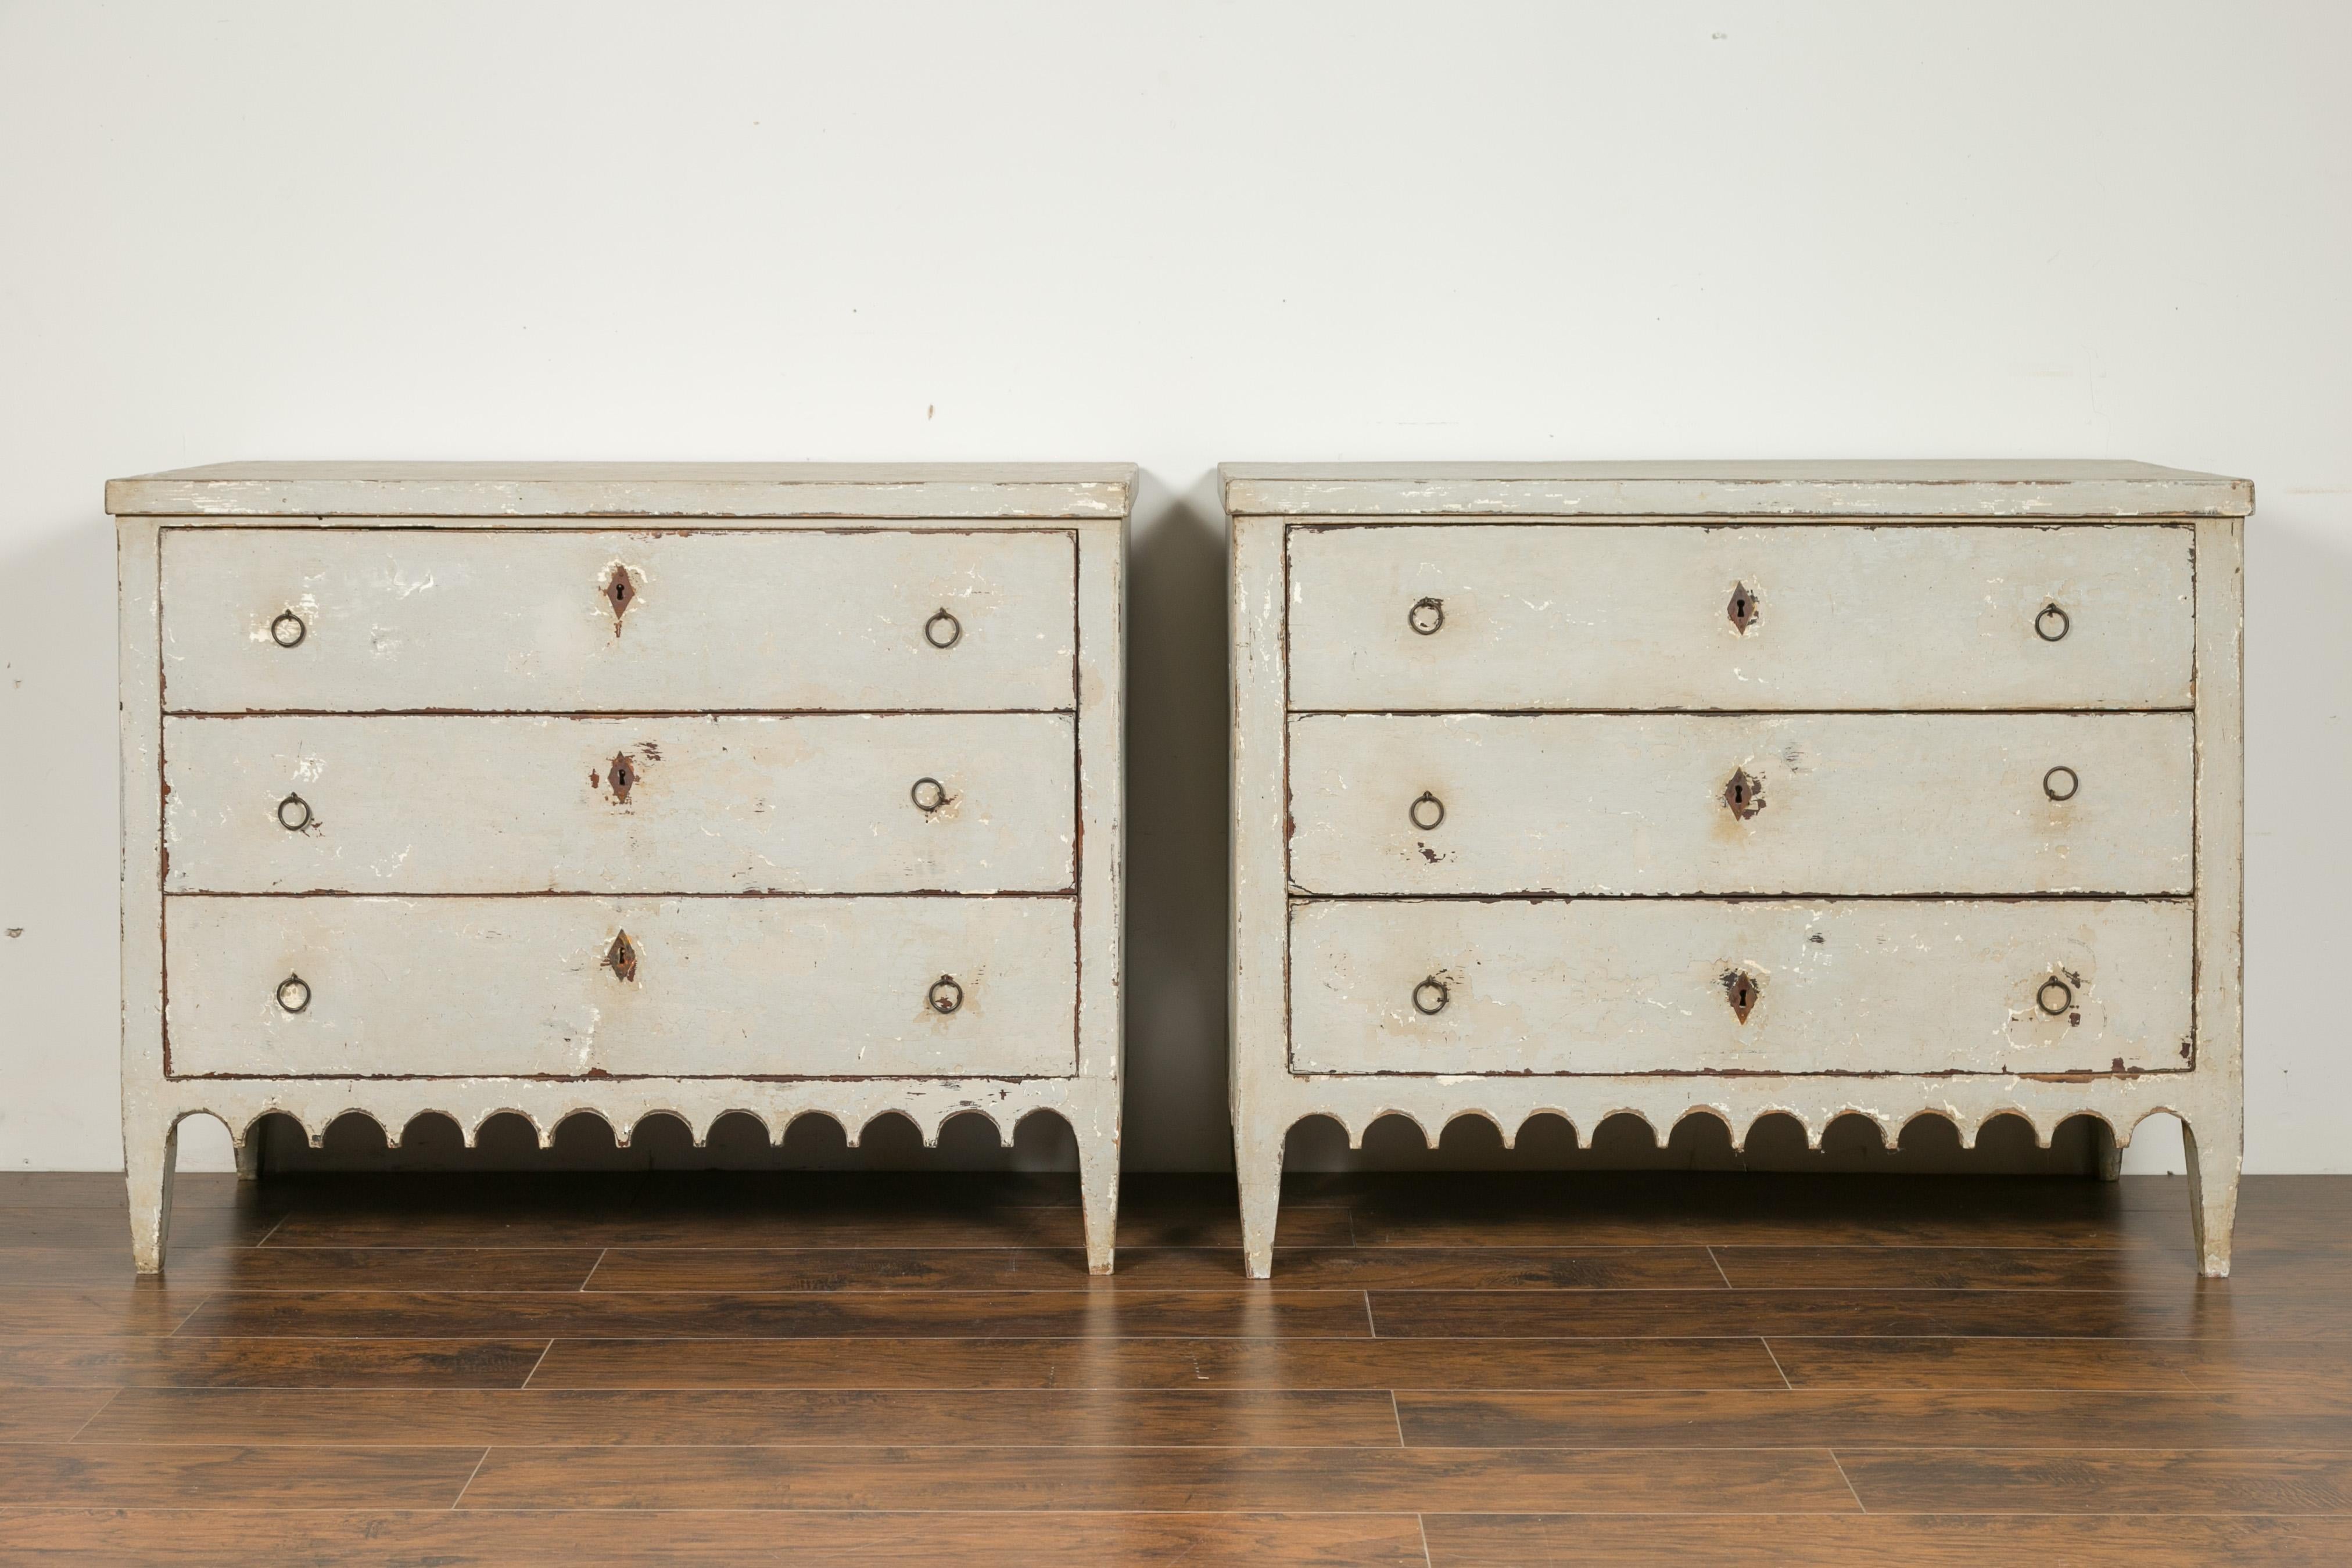 A pair of Portuguese distressed grey painted wooden three-drawer commodes from the late 19th century with scalloped aprons. Created in Portugal during the third quarter of the 19th century, each of this pair of chest-of-drawers features a